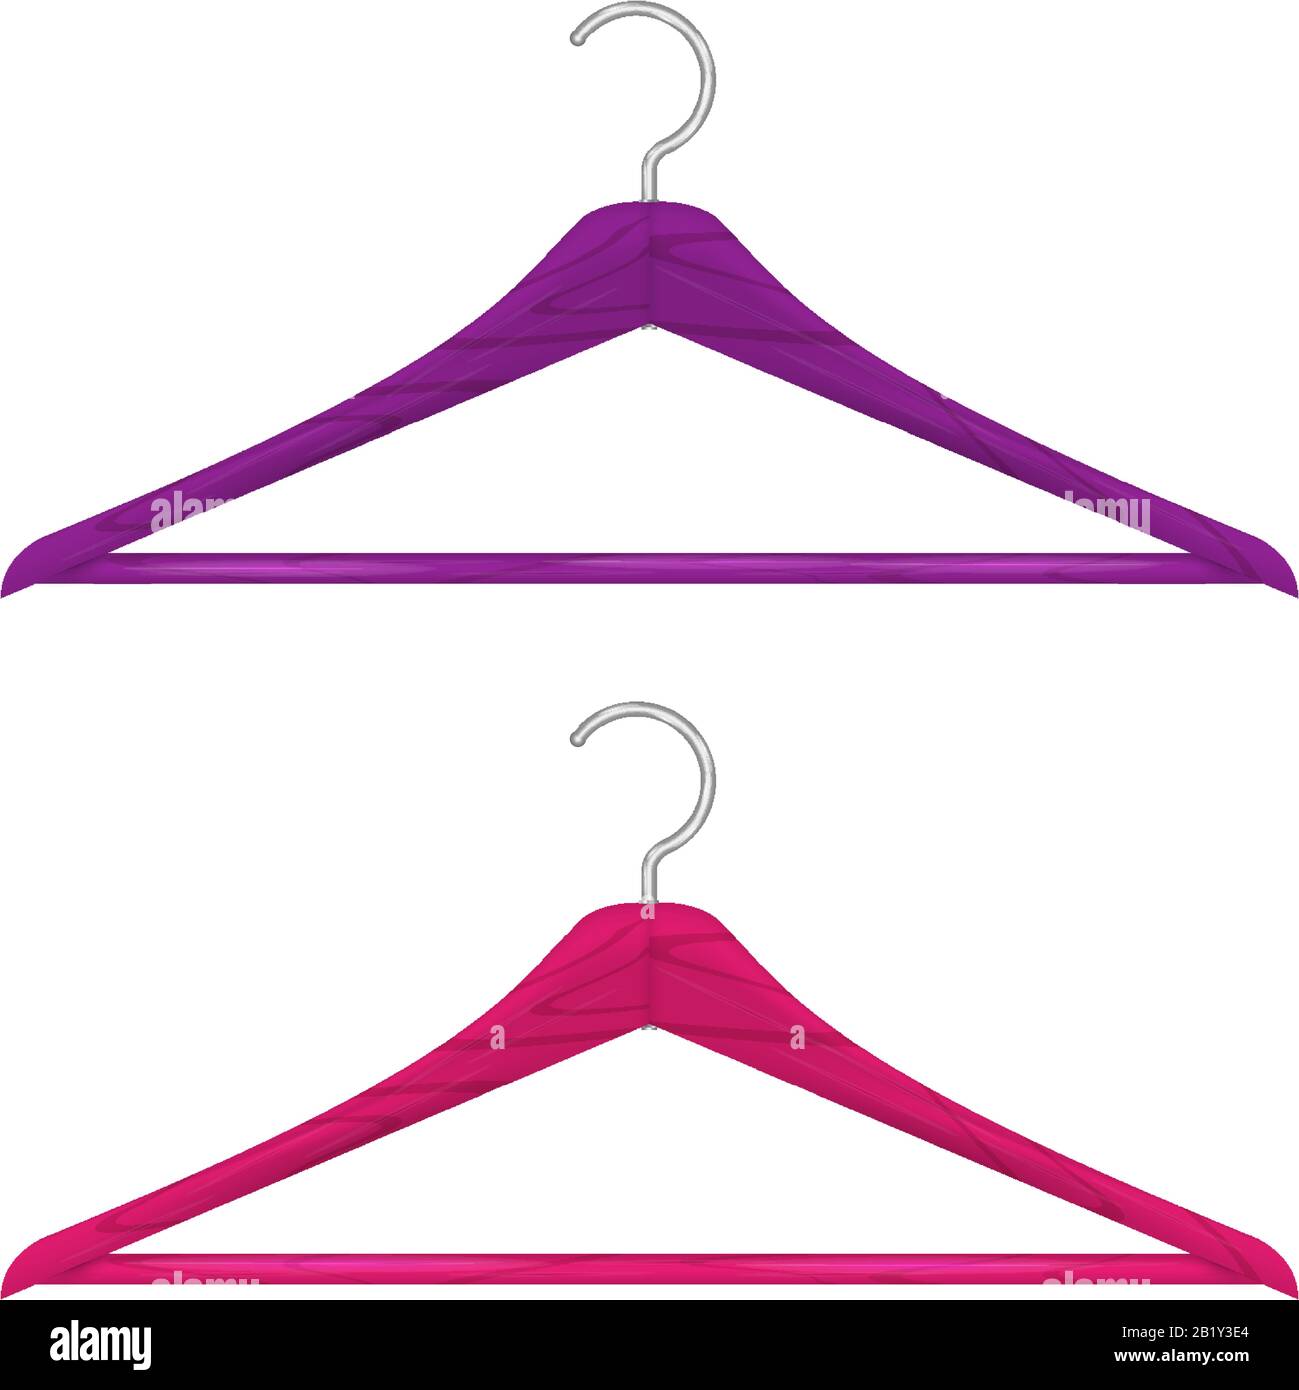 Realistic wooden clothes hanger set isolated on white. Saturated pink and purple hangers. Vector illustration. Stock Vector